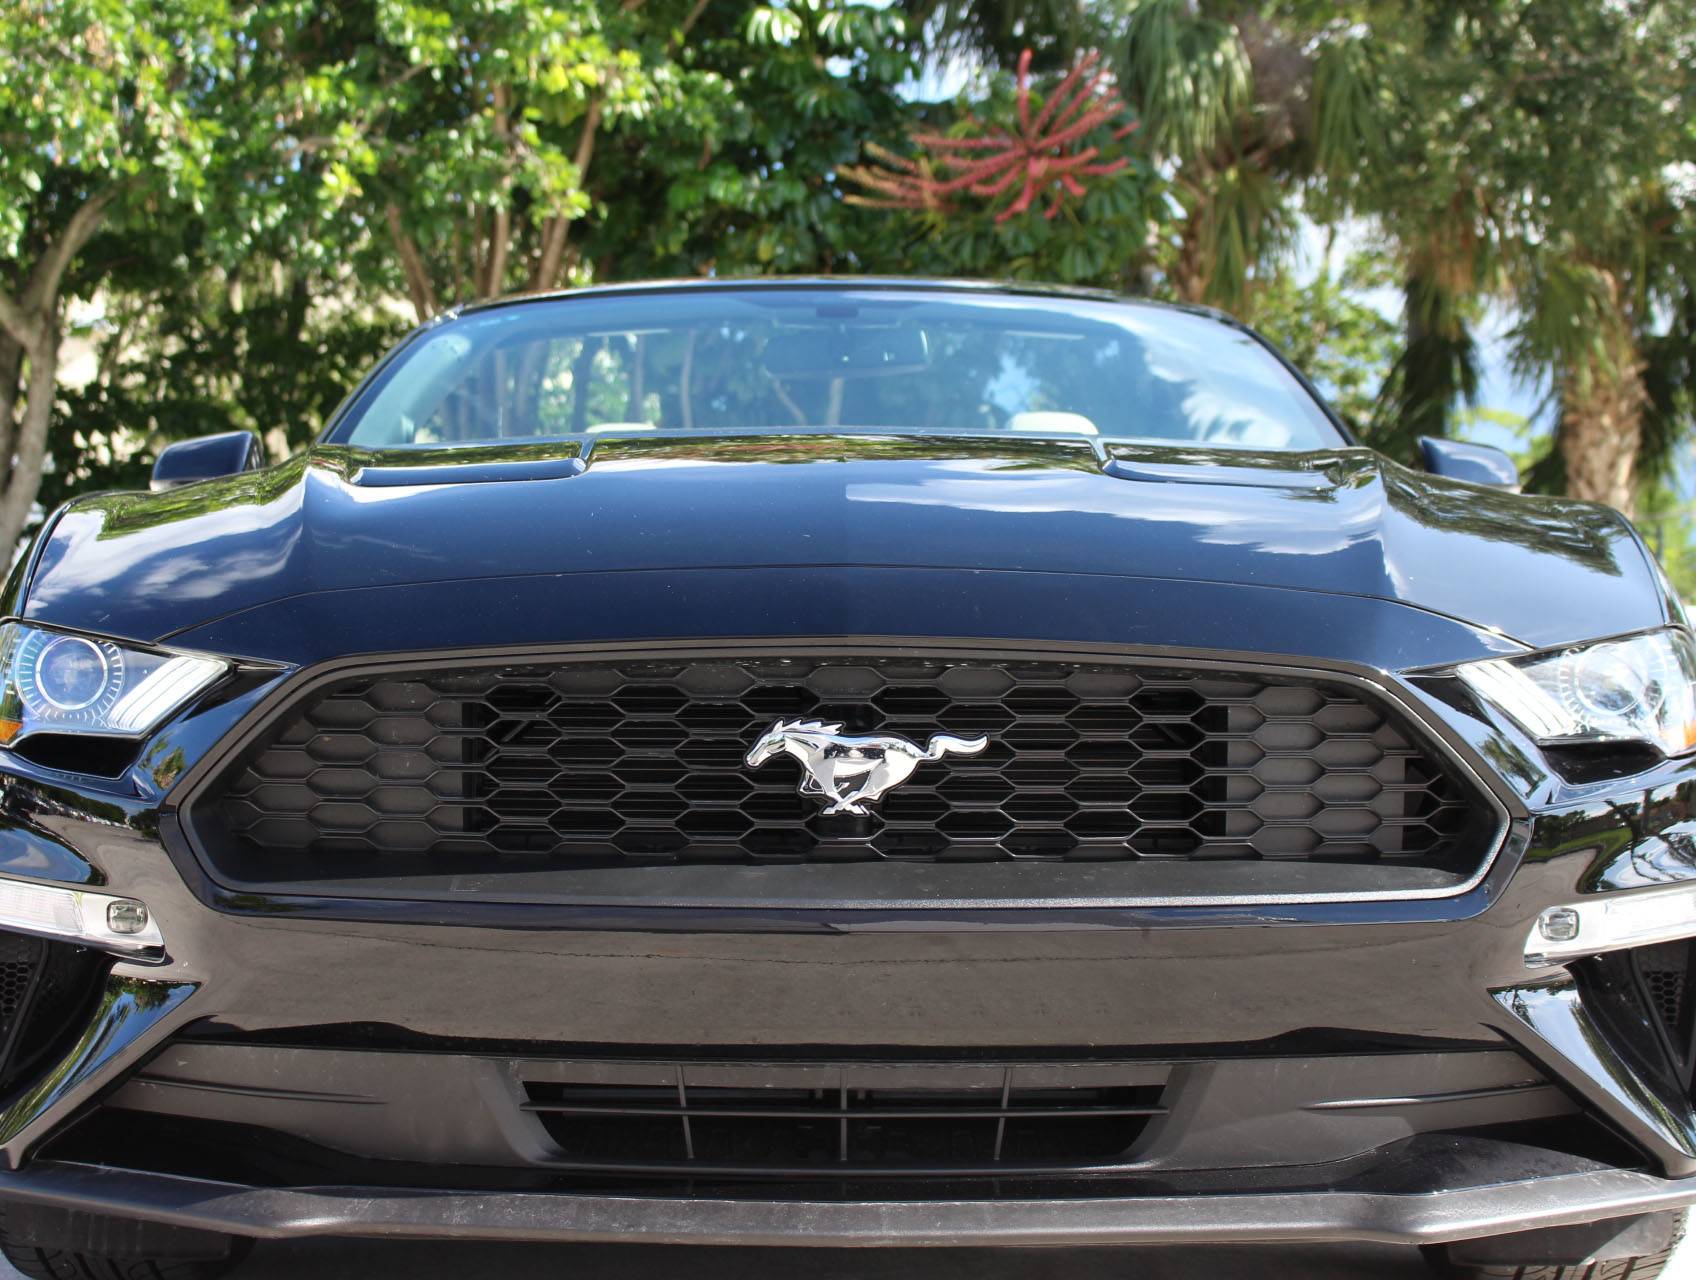 Florida Fine Cars - Used FORD MUSTANG 2018 WEST PALM Ecoboost Premium